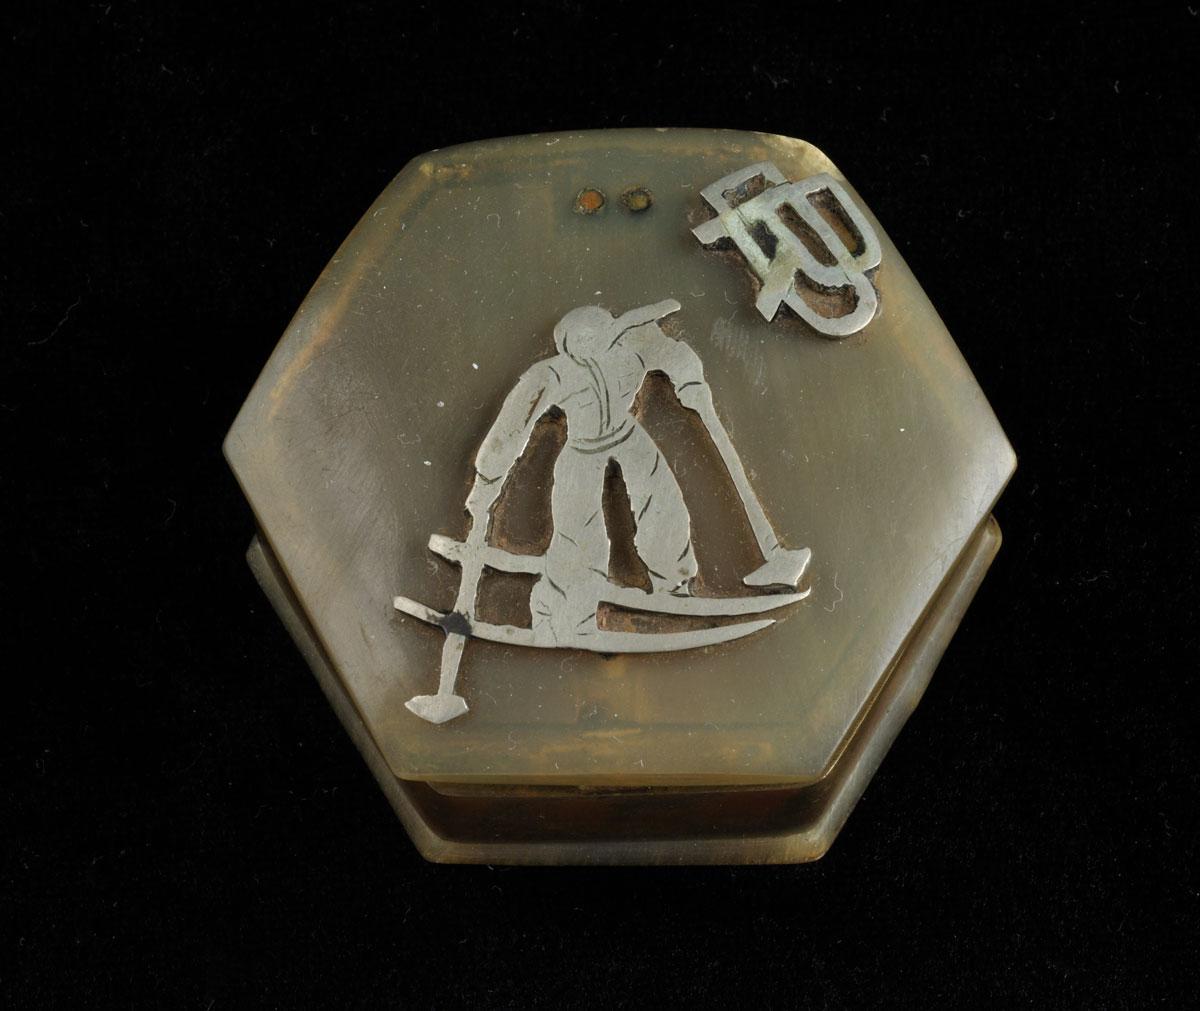 Miniature box decorated with Rosa David’s initials made by Ben Zion Averbuch in the Vapniarca camp.